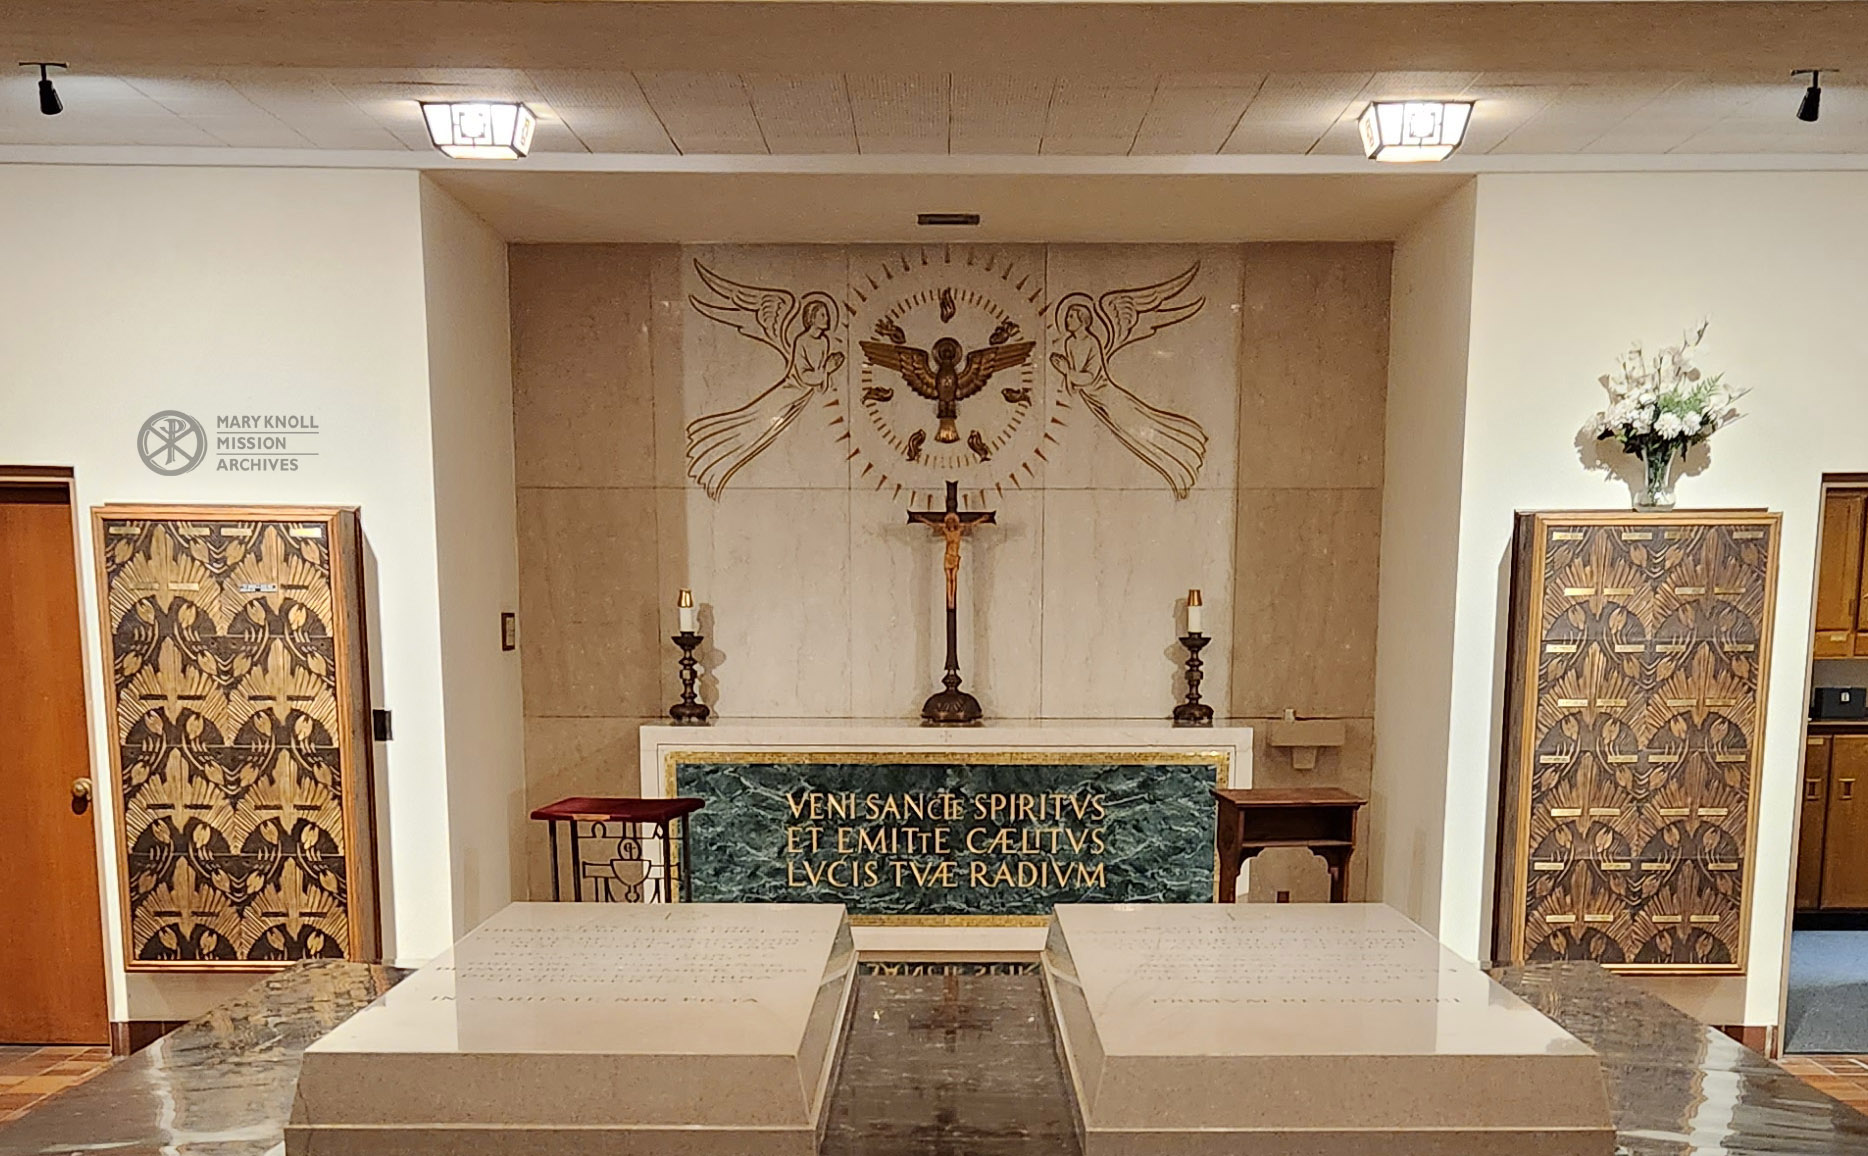 The Holy Spirit Alter flanked by two columbariums. The headstones of Fr. Thomas F. Price and Bp. James A. Walsh can also be seen here. 